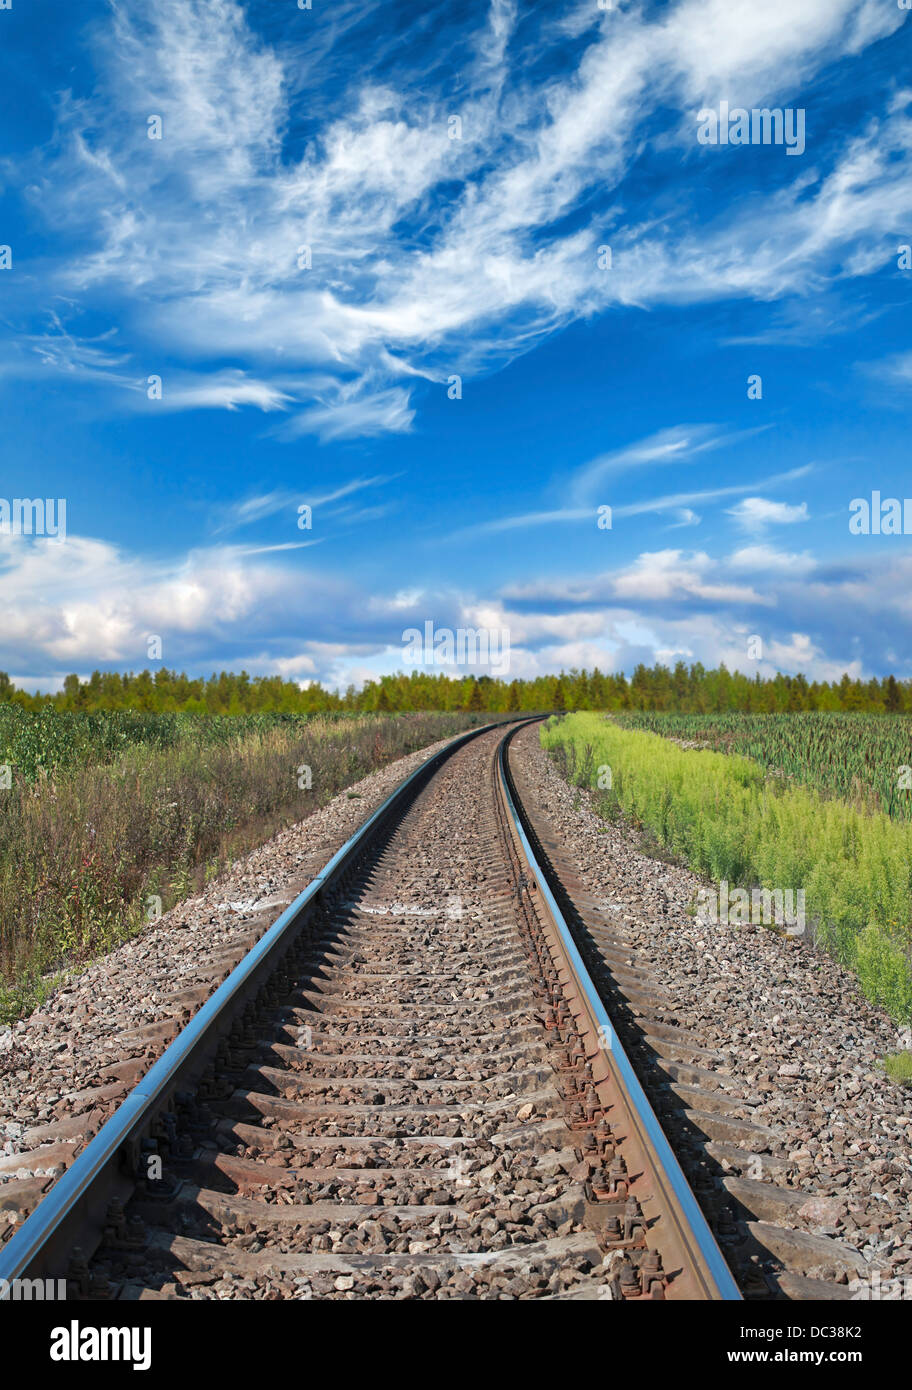 Railway perspective with green grass and blue cloudy sky Stock Photo